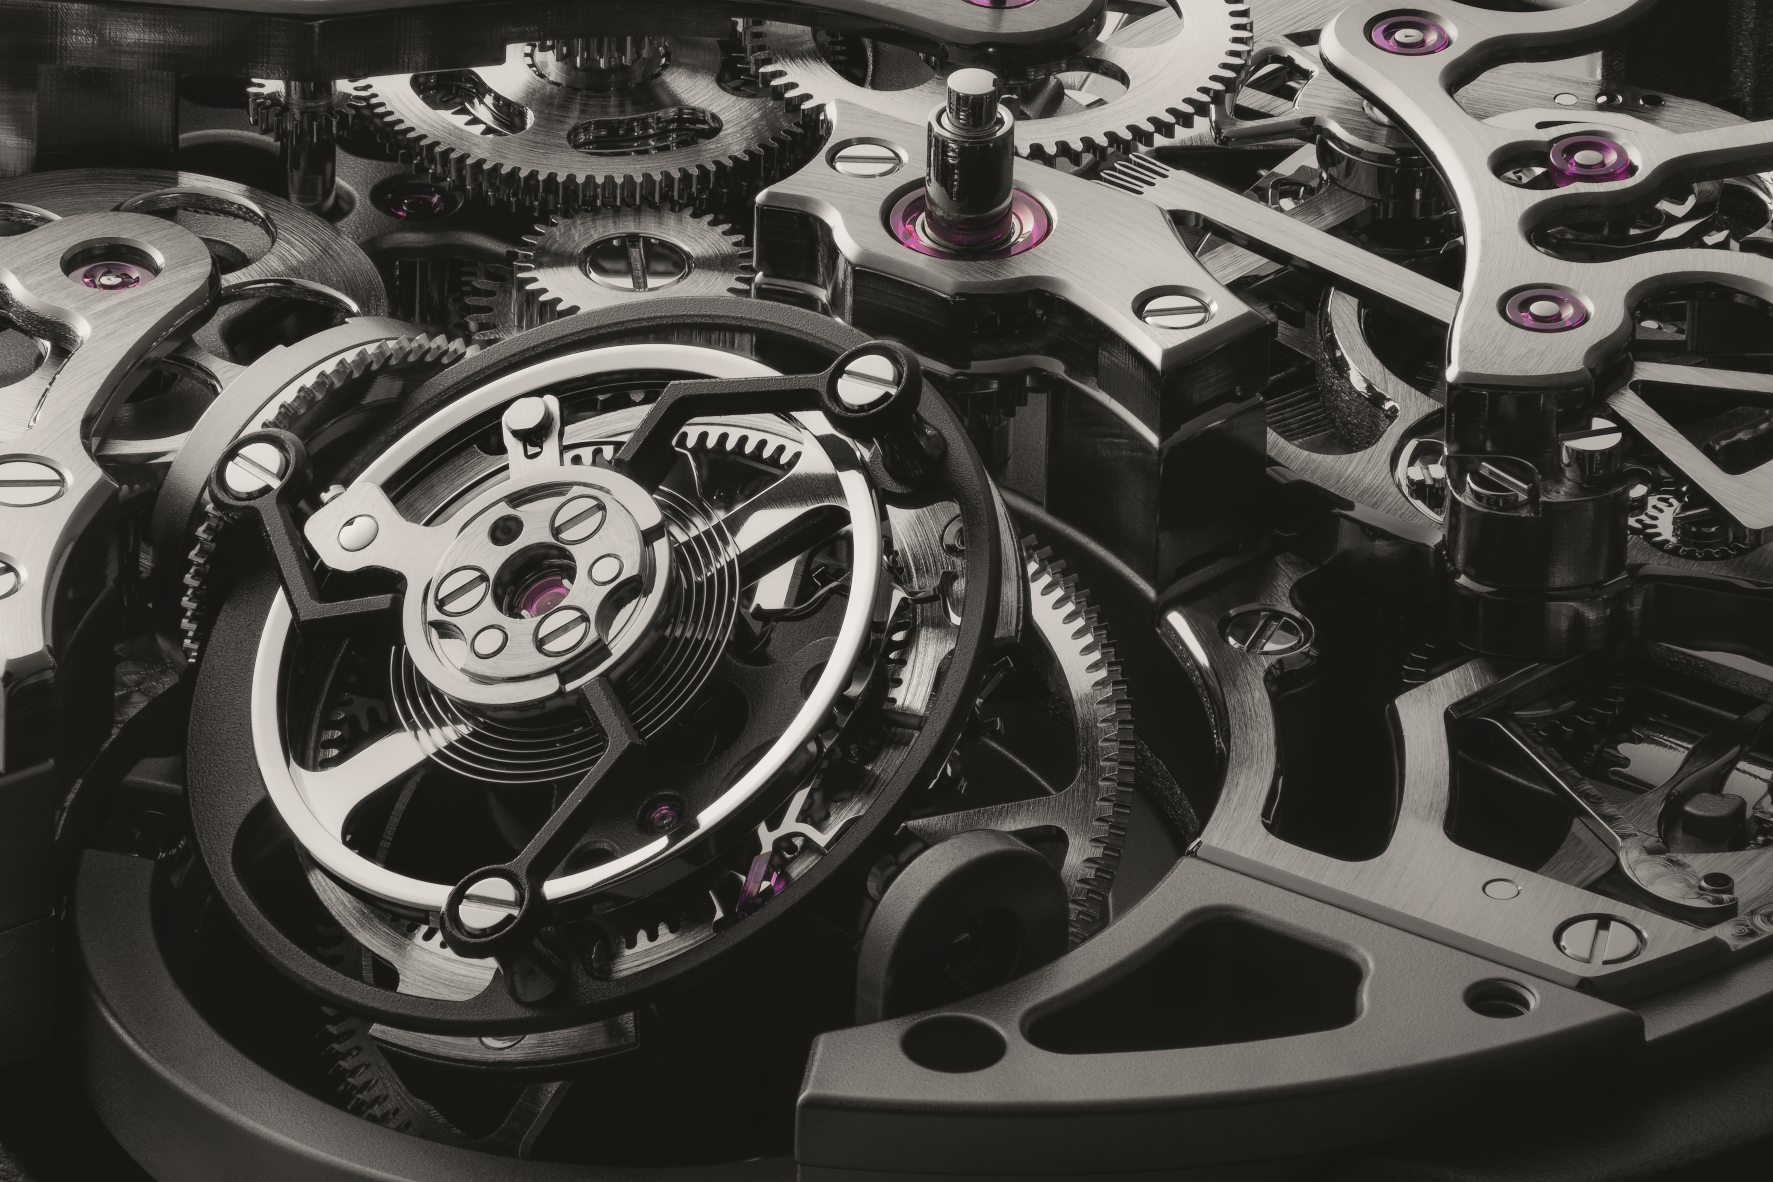 Watches and Wonders 2023  NEW Hublot Watches — The Beaverbrooks Journal